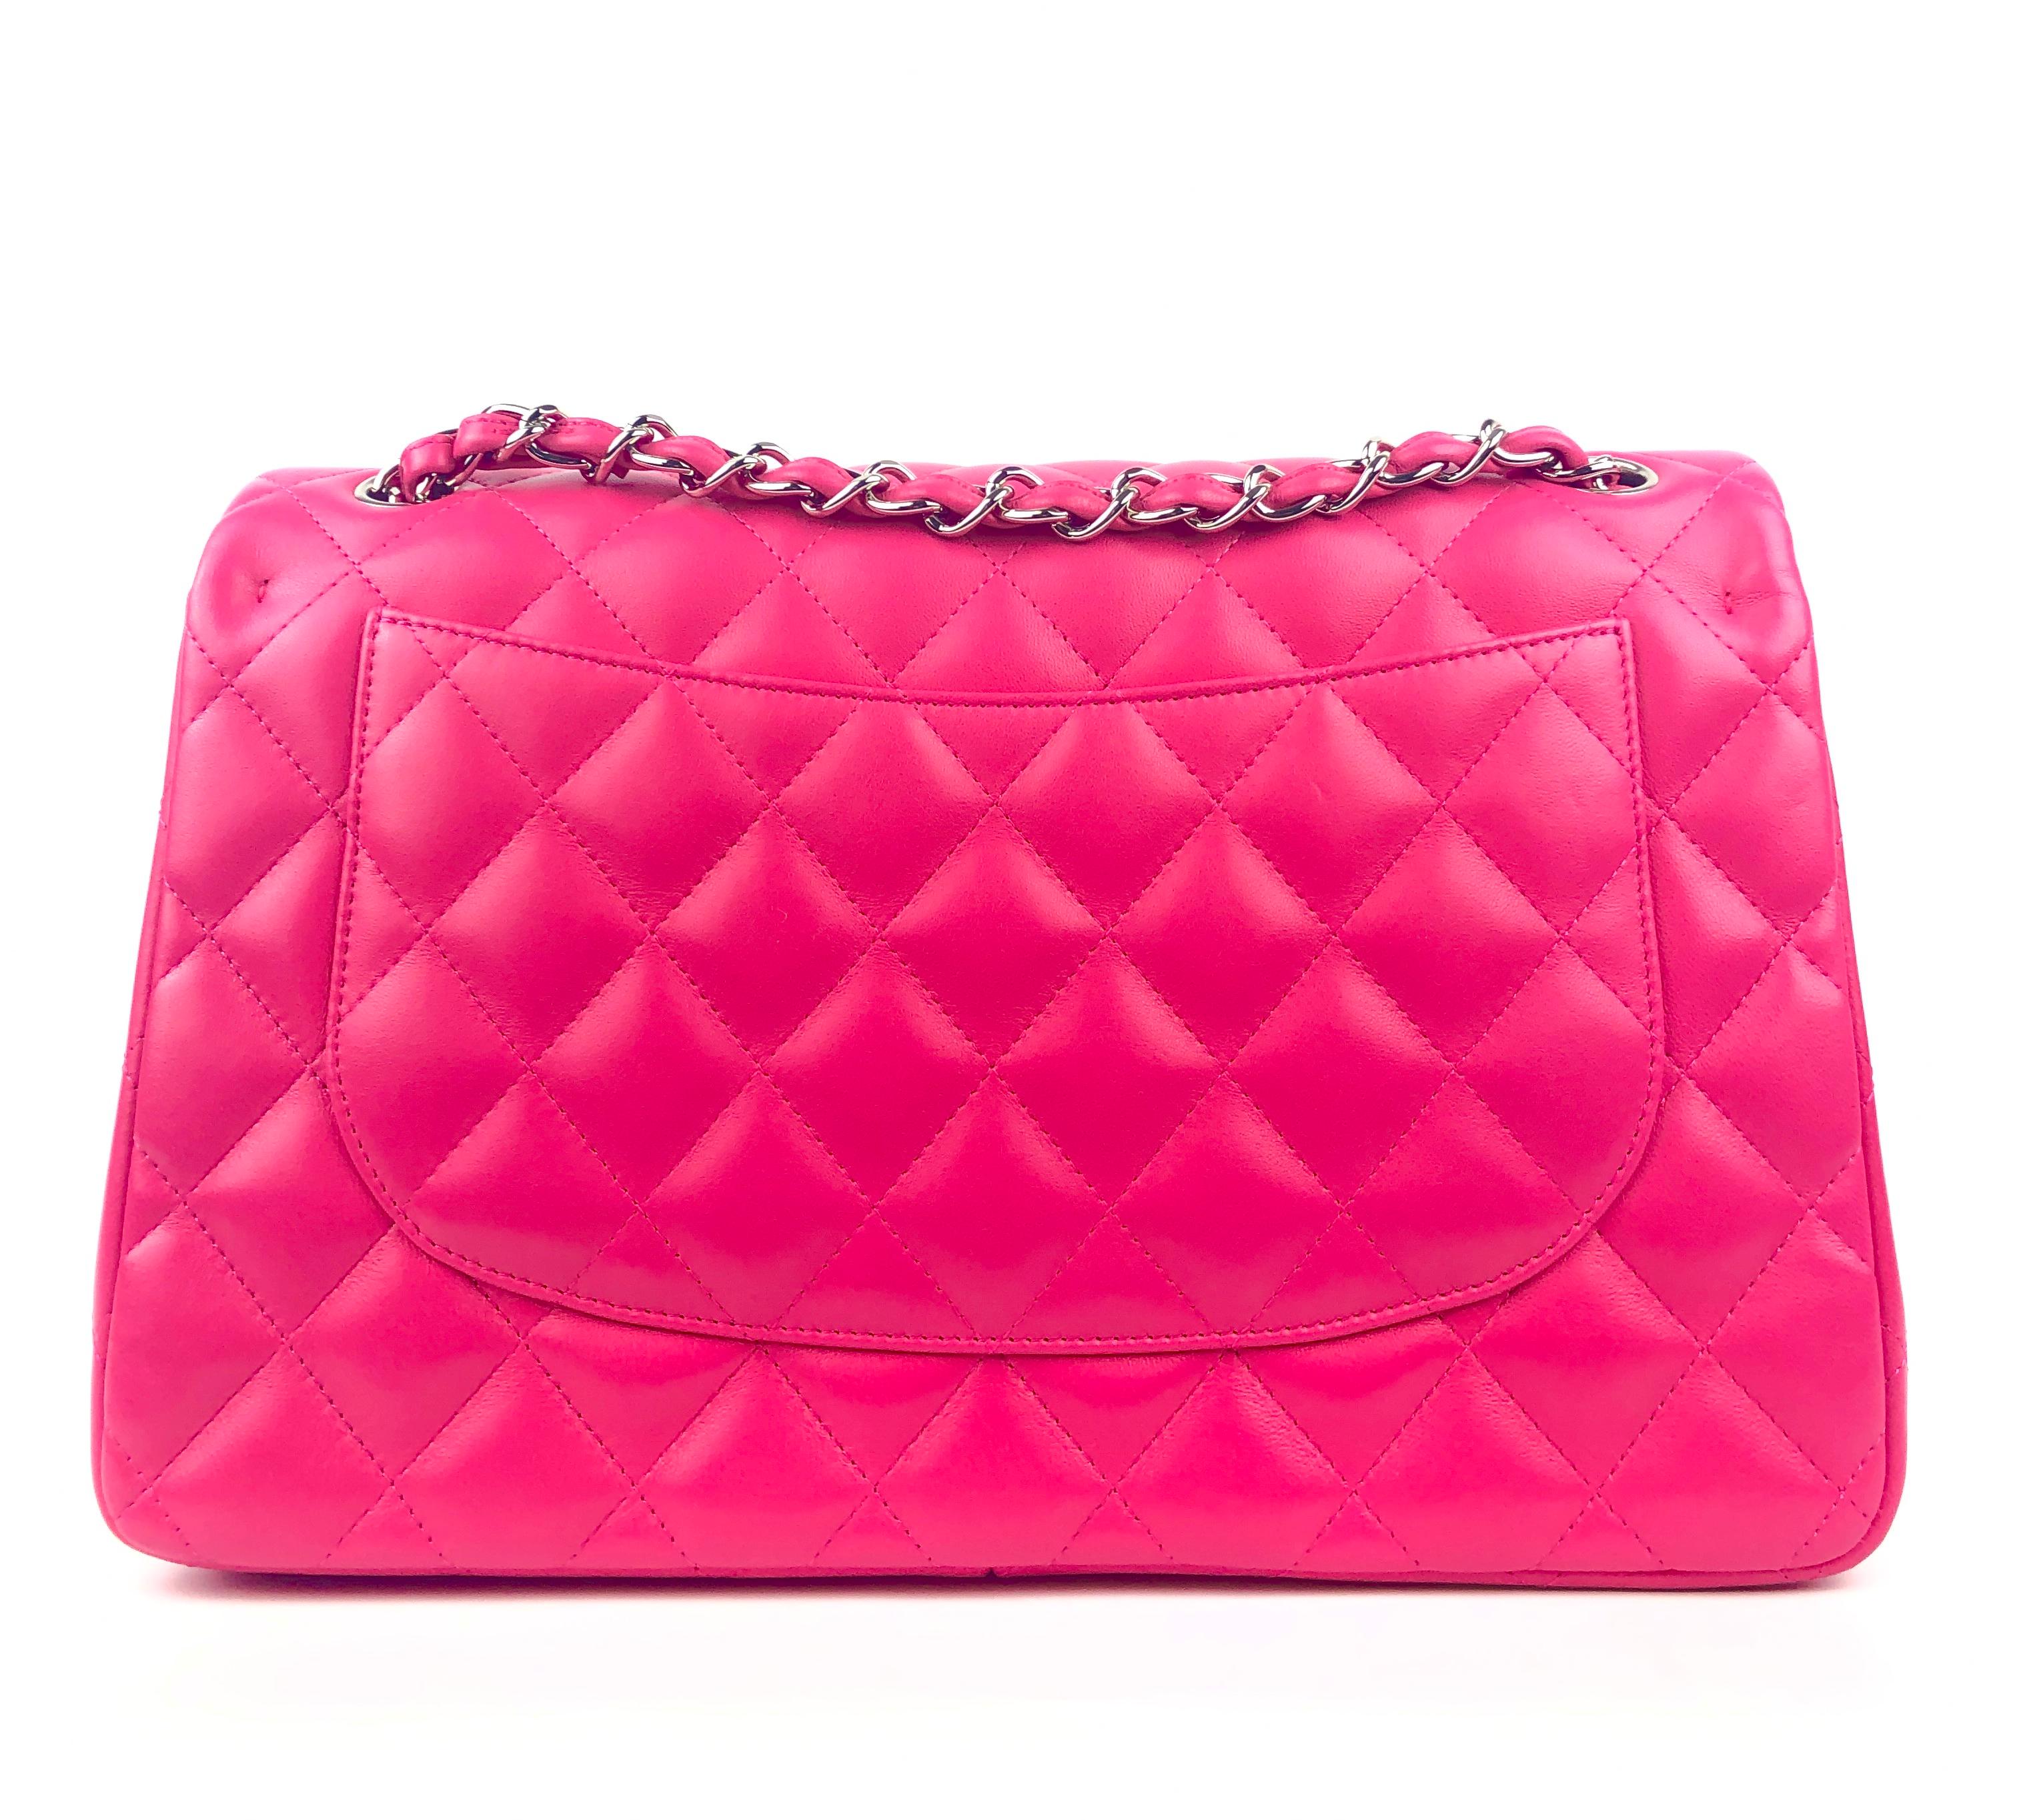 This authentic Chanel Fuschia Lambskin Jumbo Classic Flap is in pristine condition.  The highly sought after Jumbo Classic is breathtaking in this vivid shade of spicy hot pink.
Quilted lambskin with silver tone interlocking CC twist lock on